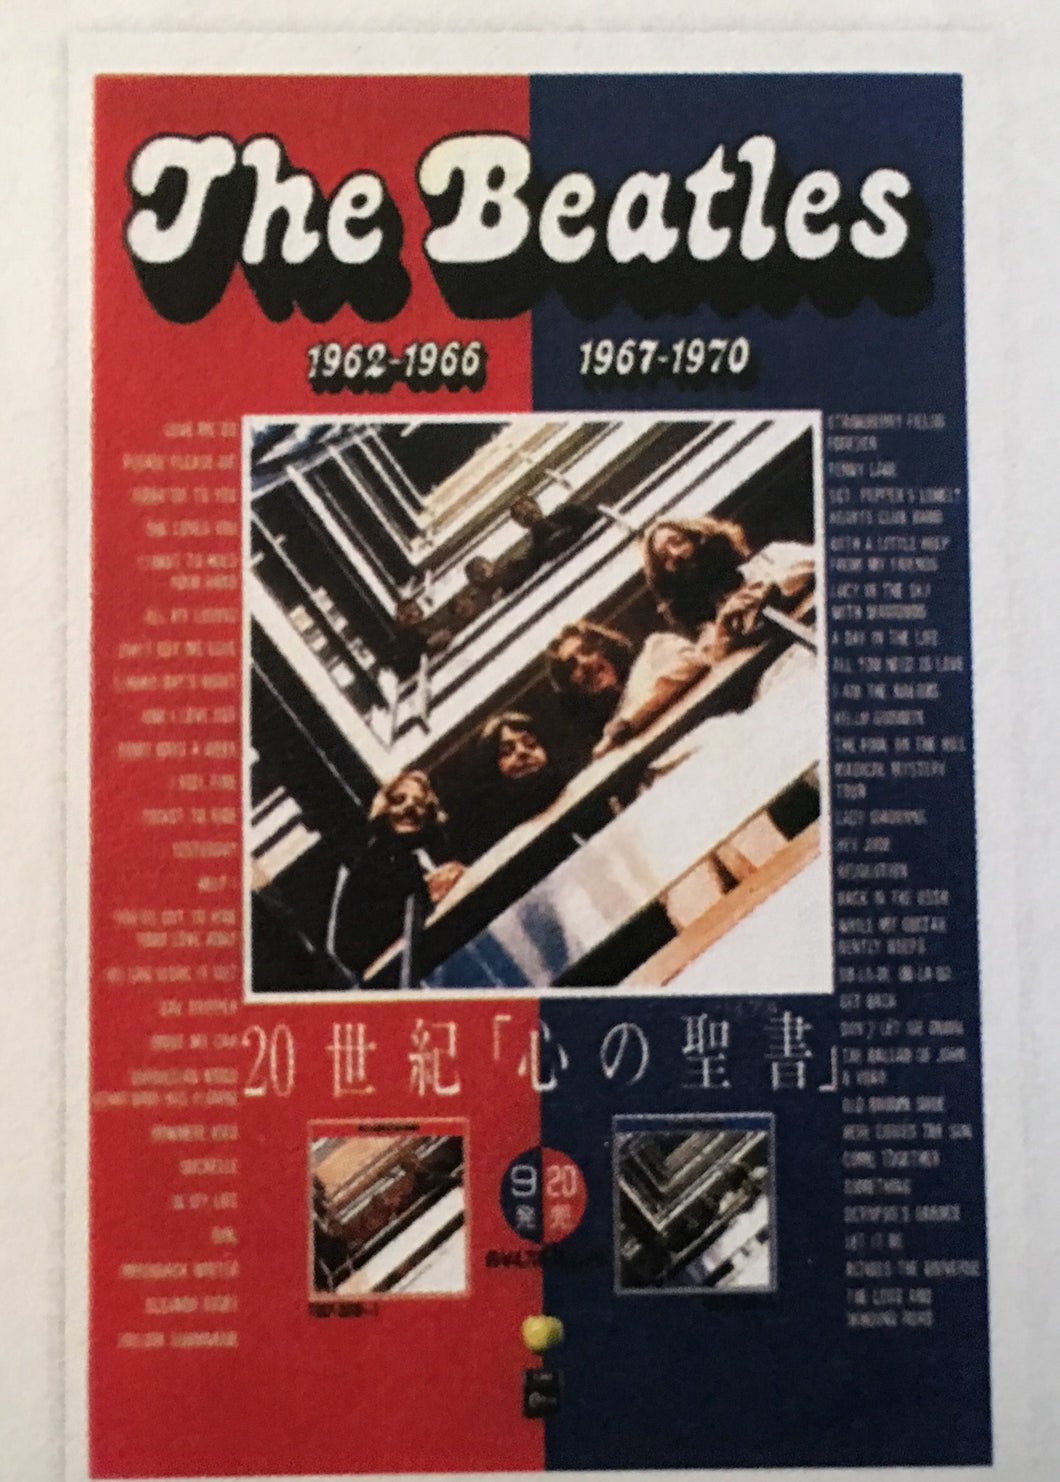 The Beatles 1962-66 and 1967-70 Print